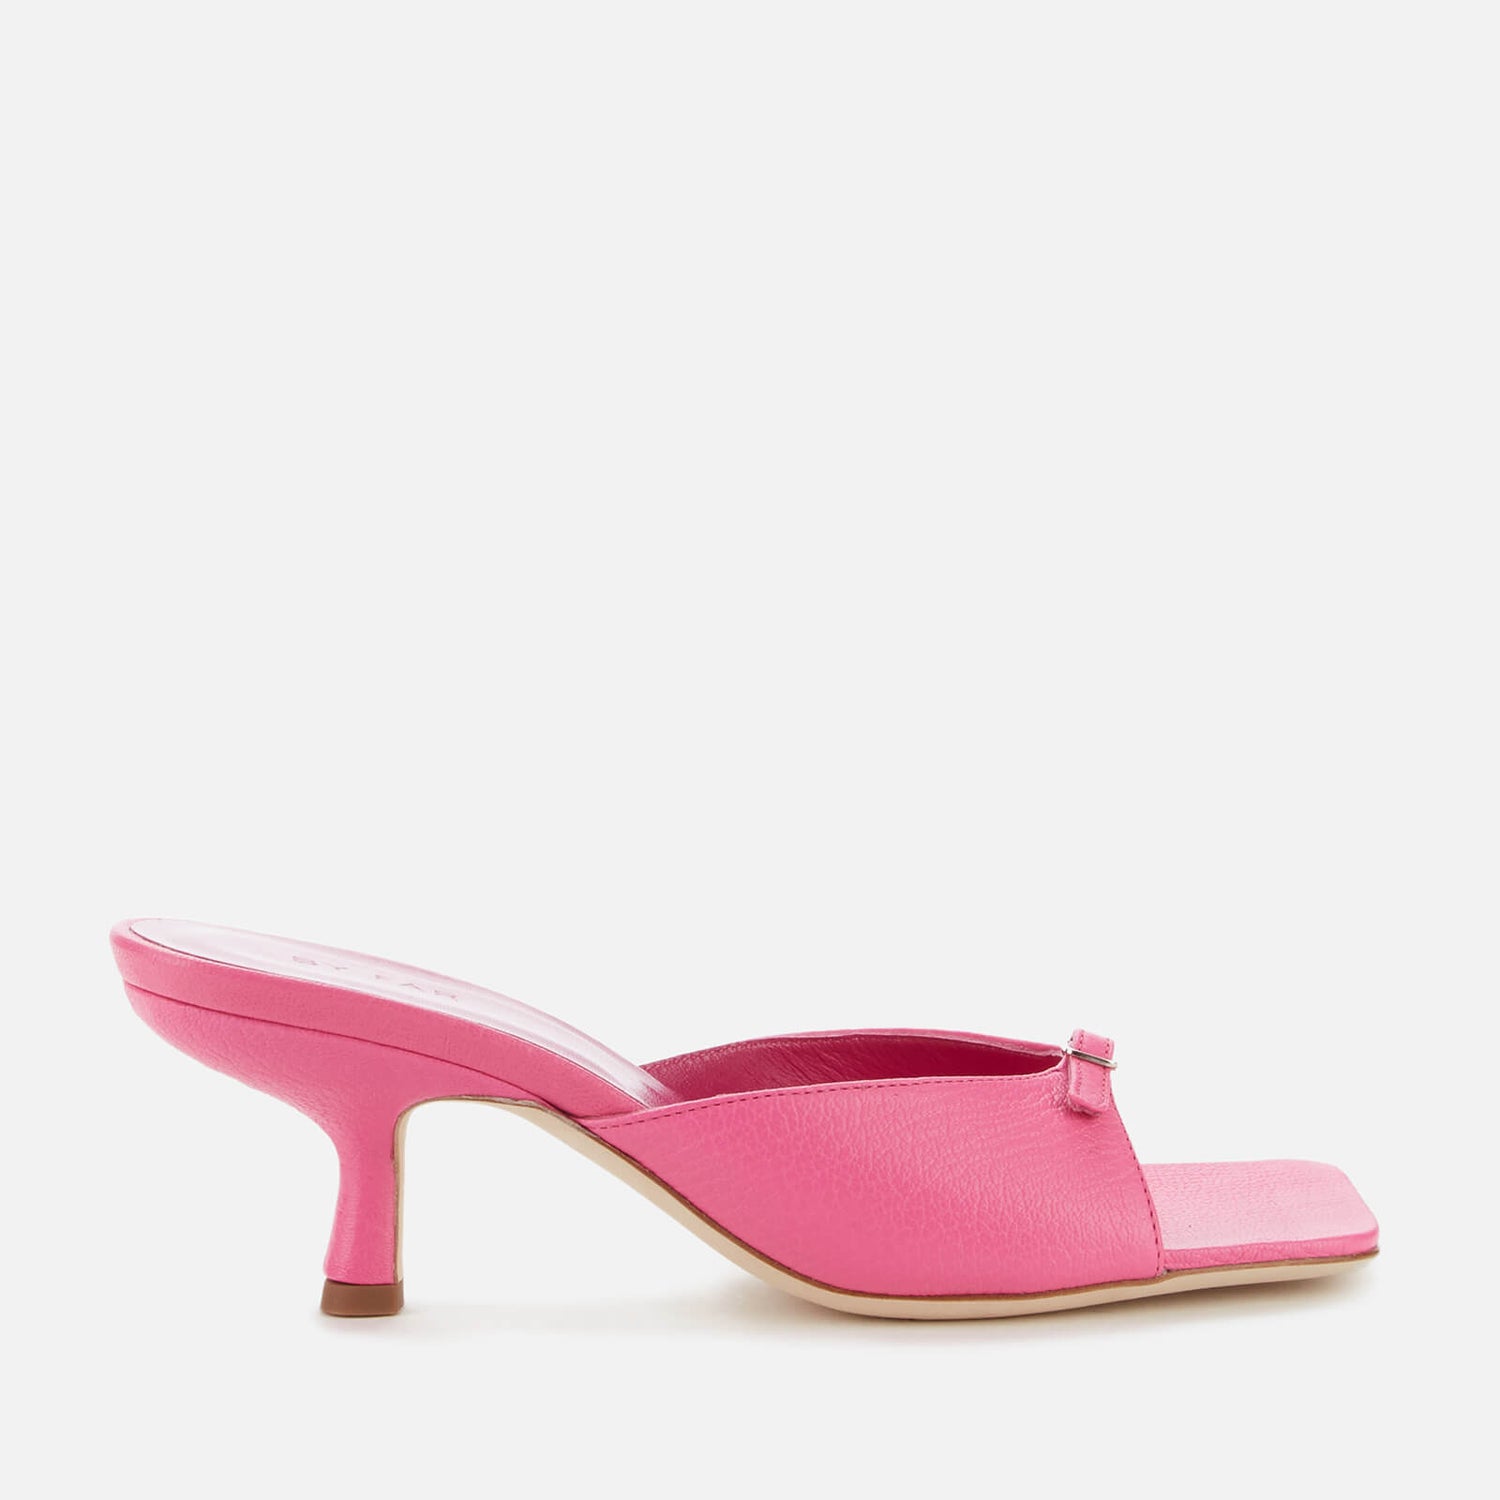 BY FAR Women's Erin Leather Heeled Mules - Hot Pink - Free UK Delivery ...